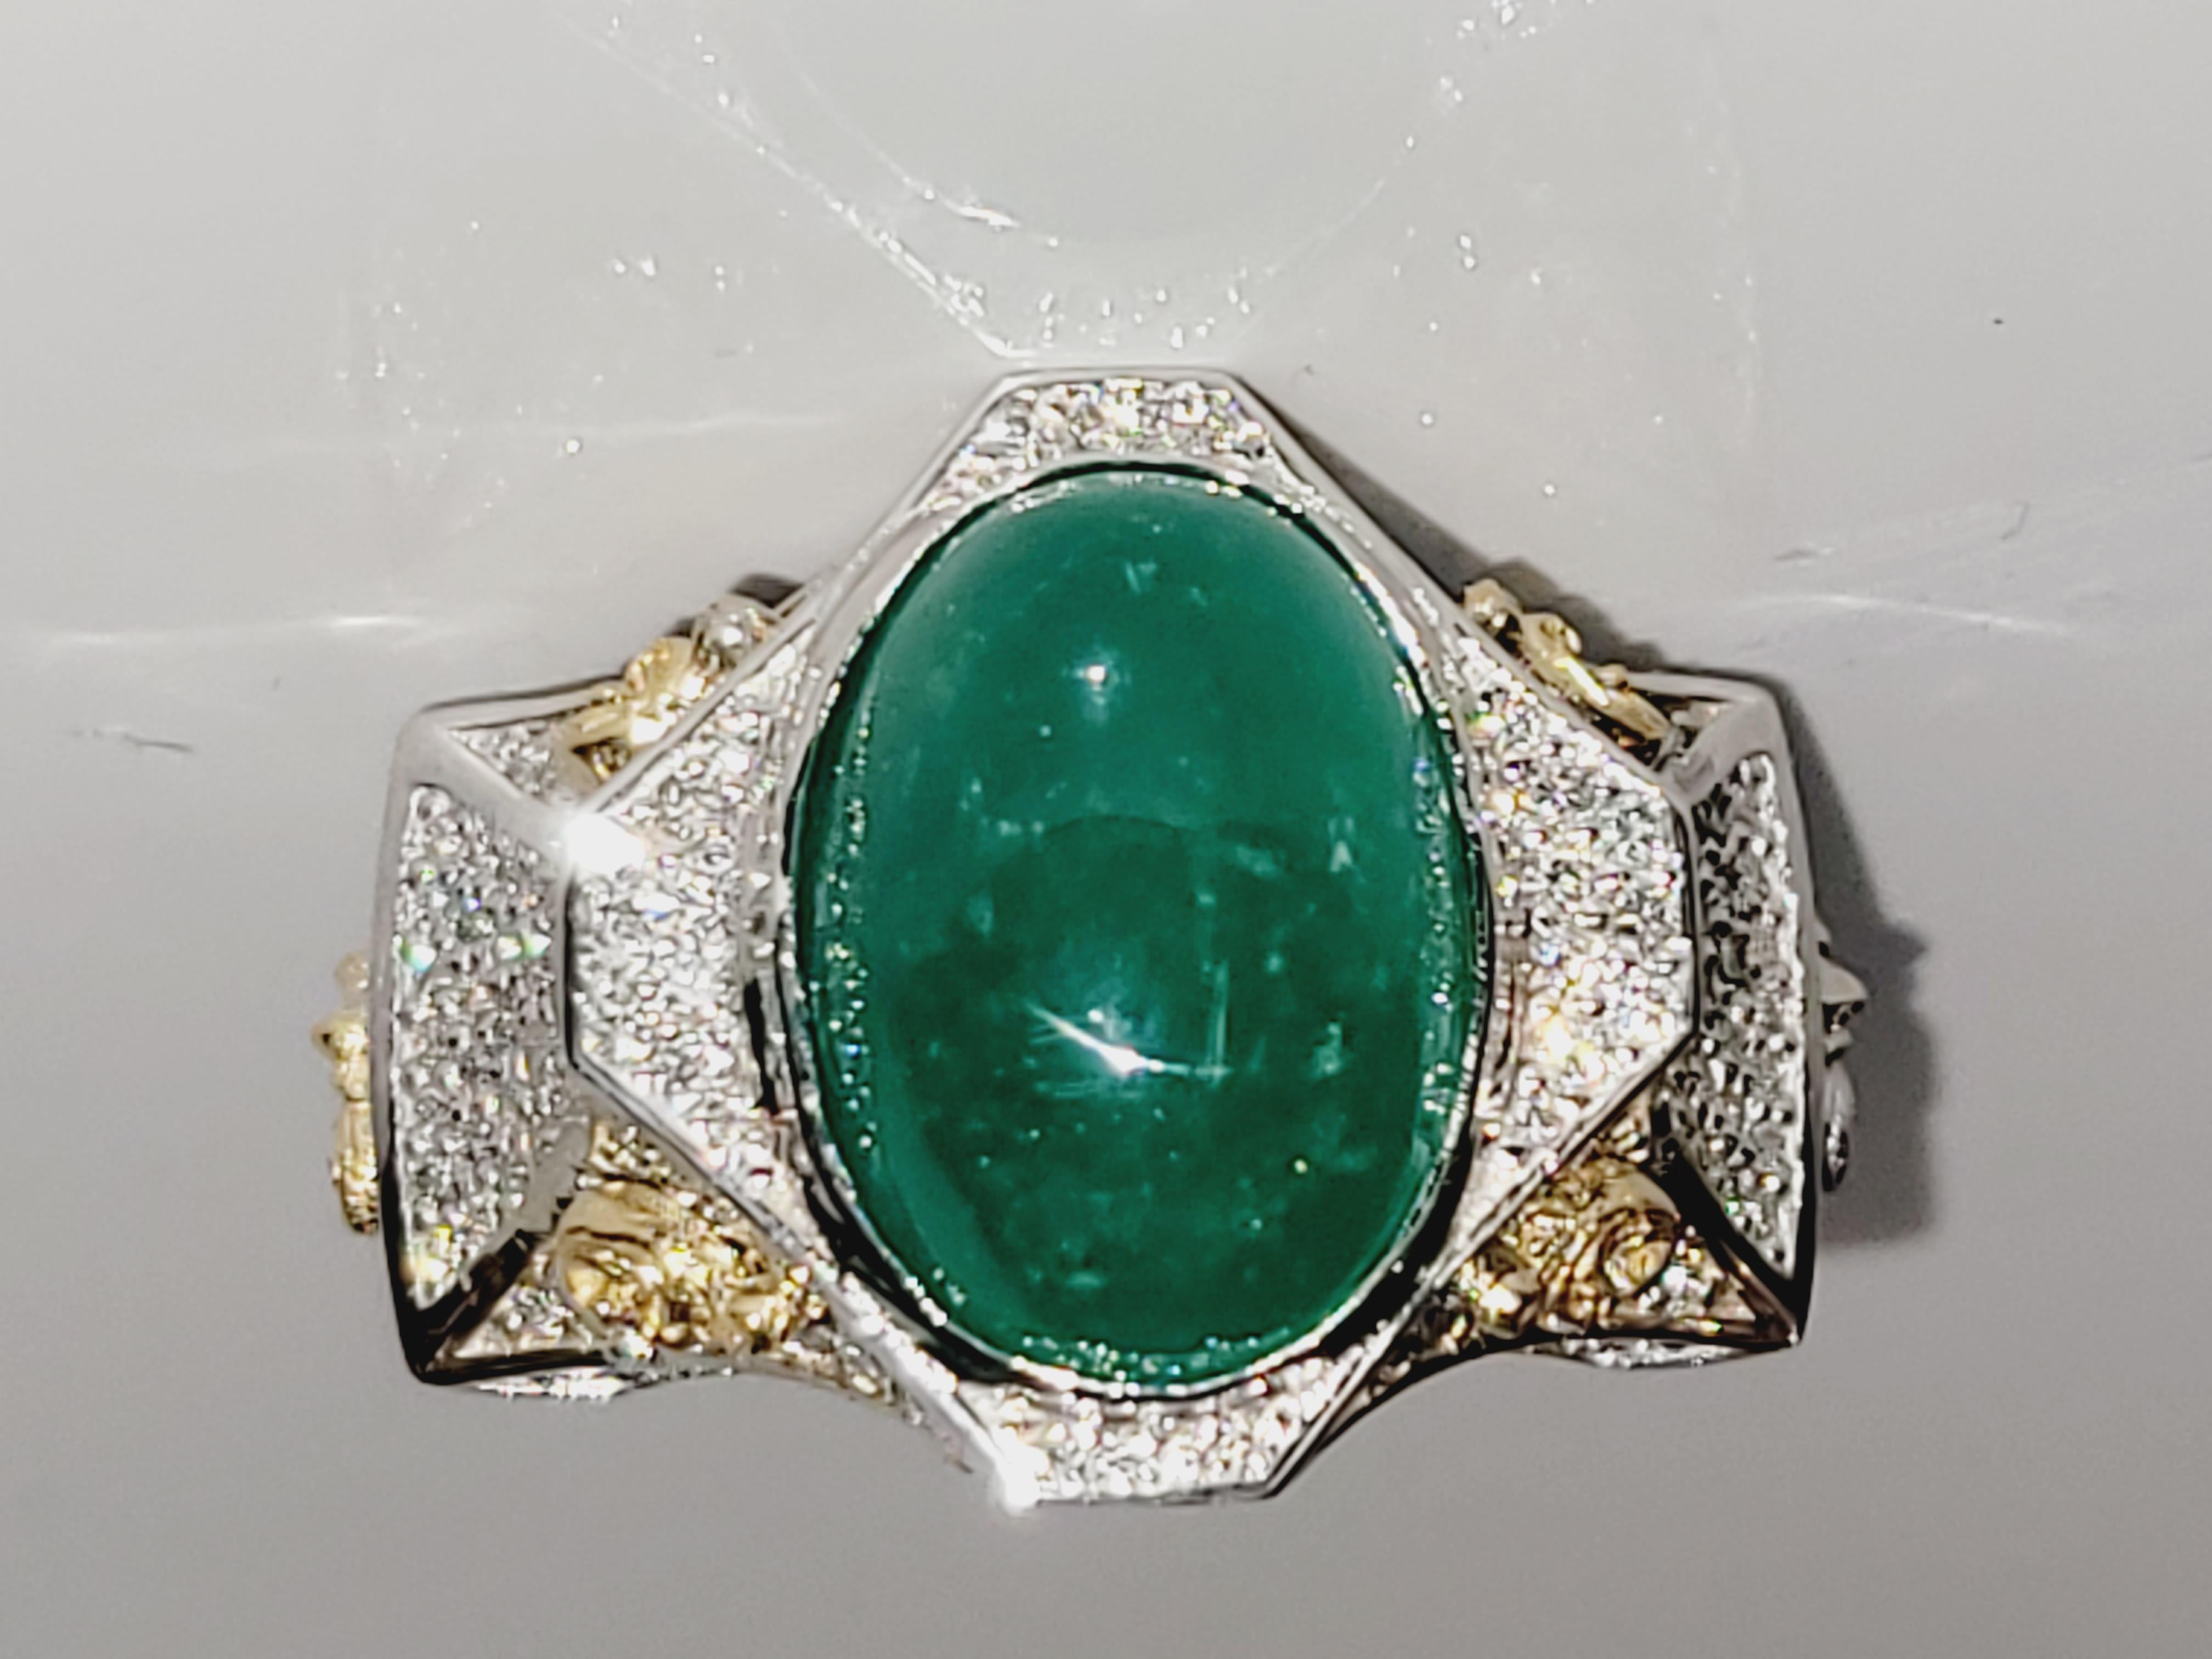 This exquisite ring  are a one-of-a kind execution from the Renaissance era! Featuring 260 round cut diamonds 2.90 ct VS F color and one cabochon natural emerald  8.50 carat total weight, these ring are essence of sophisticated. With hand-cut azures